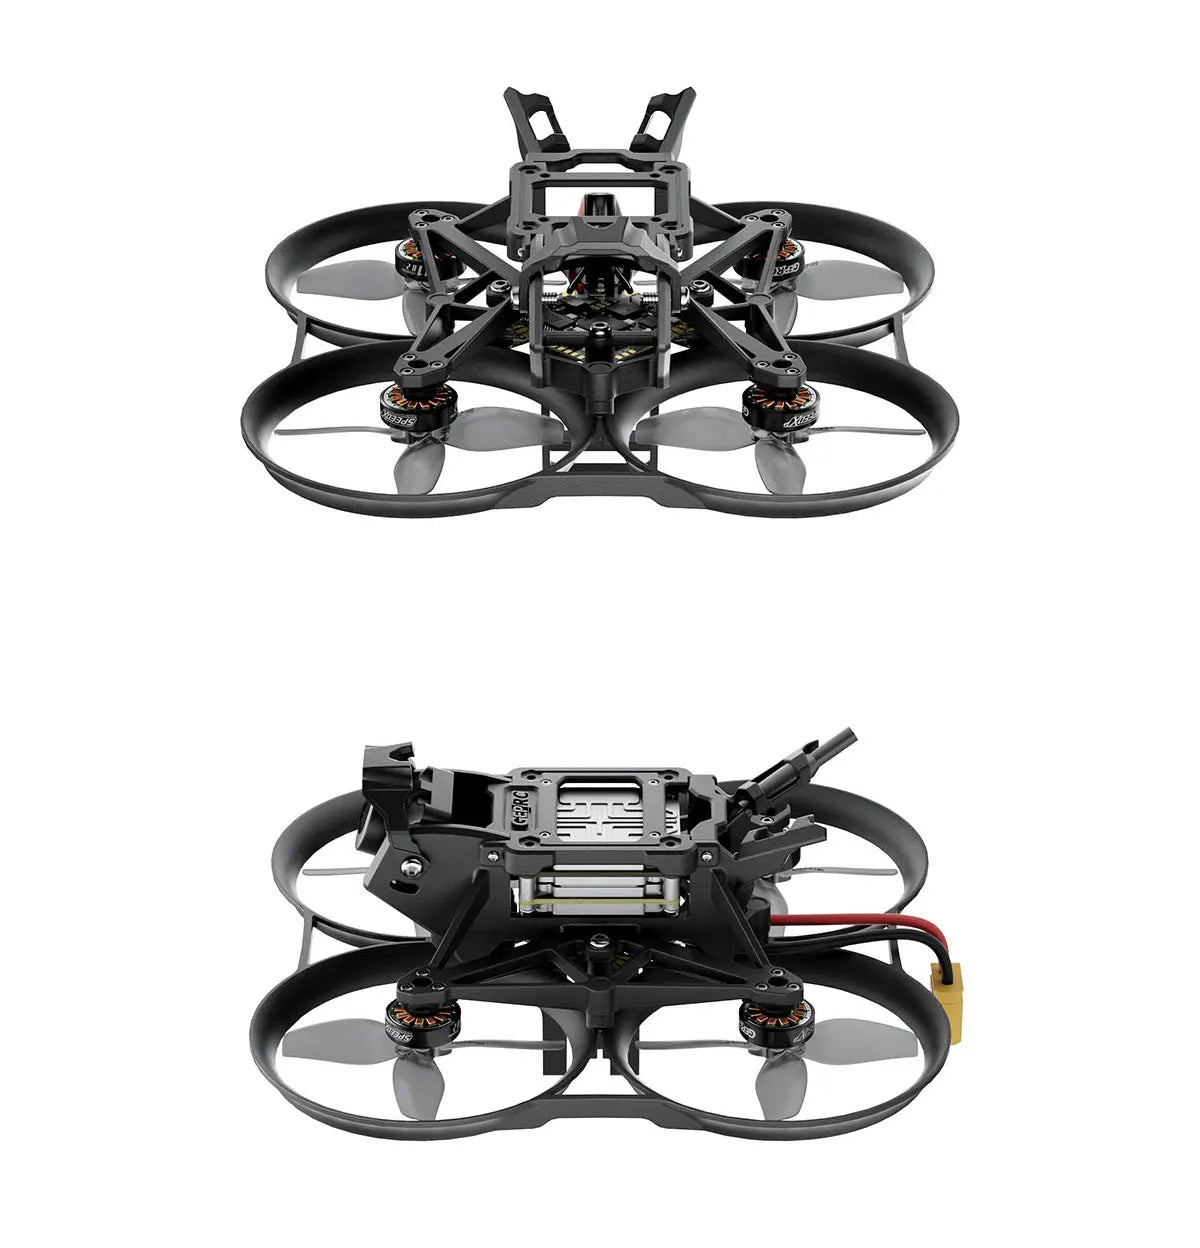 GEPRC DarkStar20 HD Wasp FPV, Built-in O3 Air Unit card record up to 4K 120fps high-